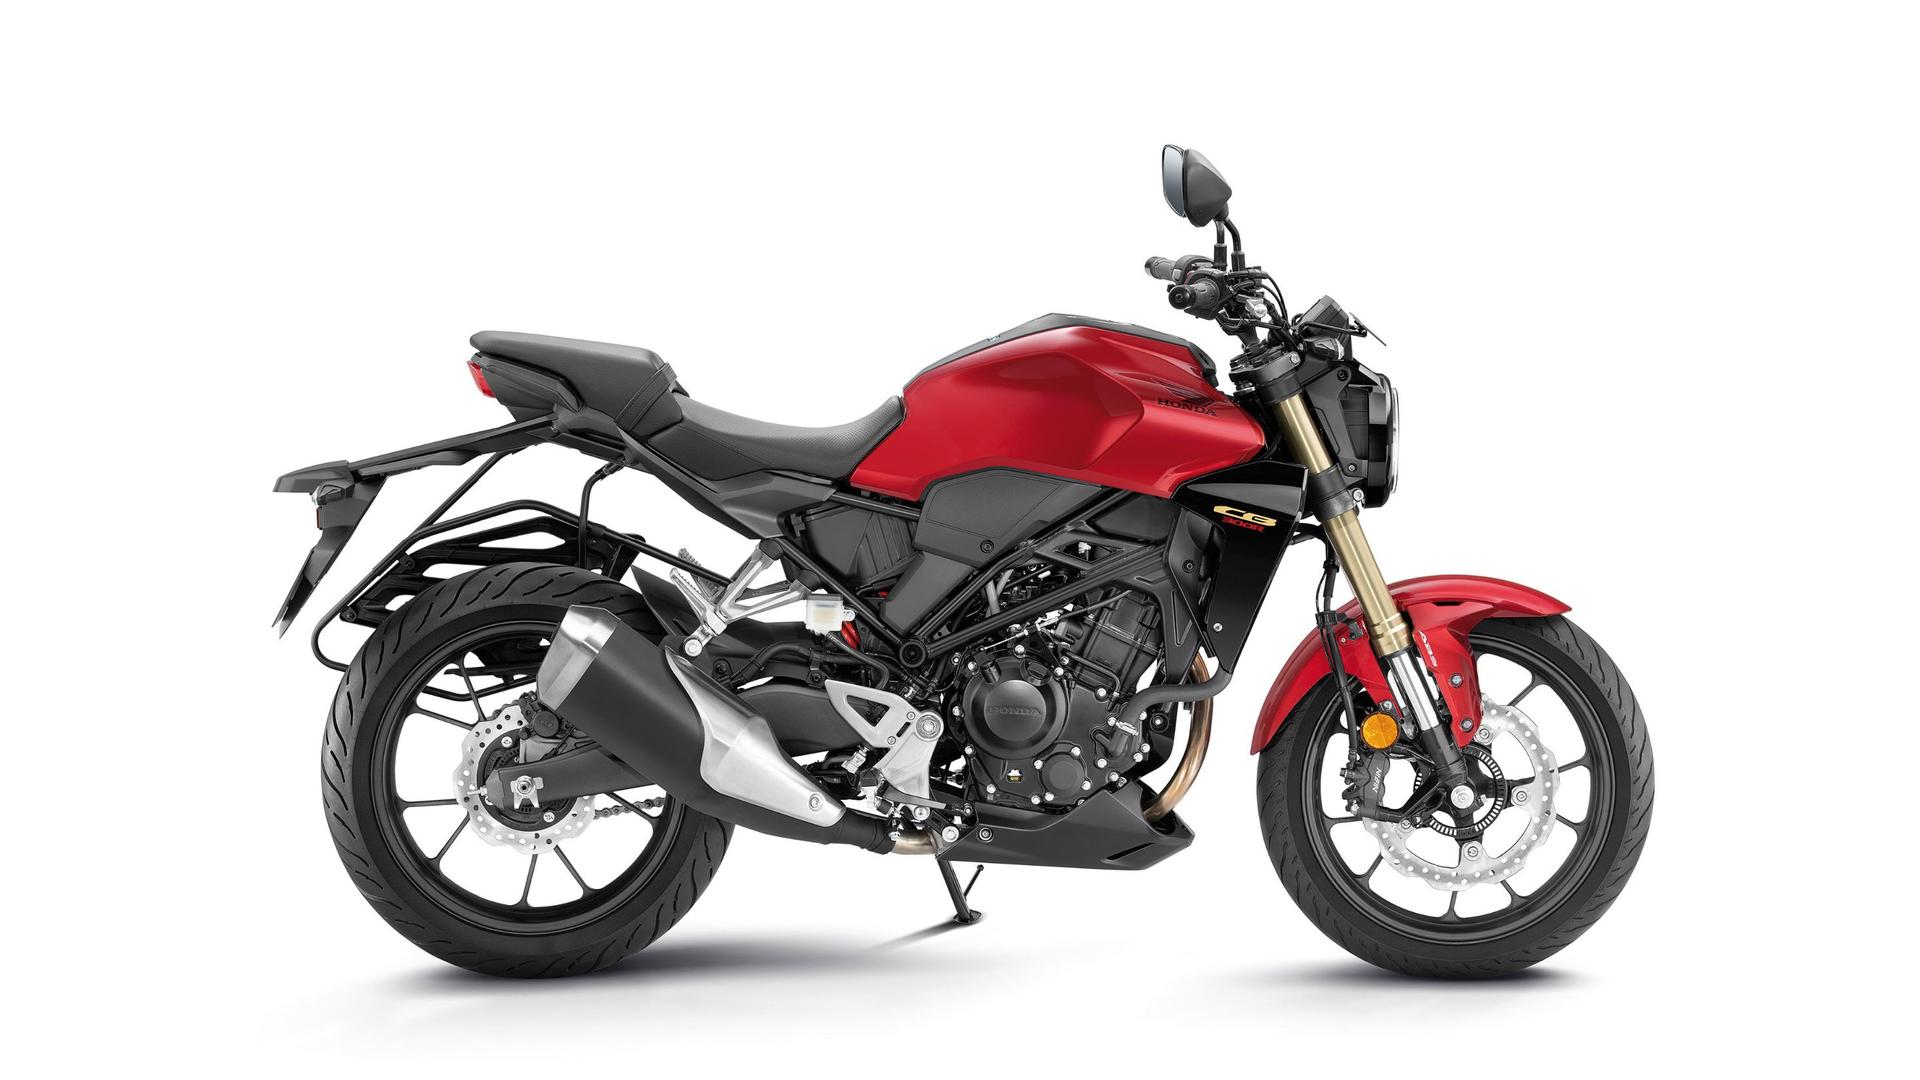 Honda Motorcycle and Scooter India has been on a launch spree and the latest launch from the company is the 2023 CB300R, which is priced at Rs. 2.4 lakh (ex-showroom, Delhi).